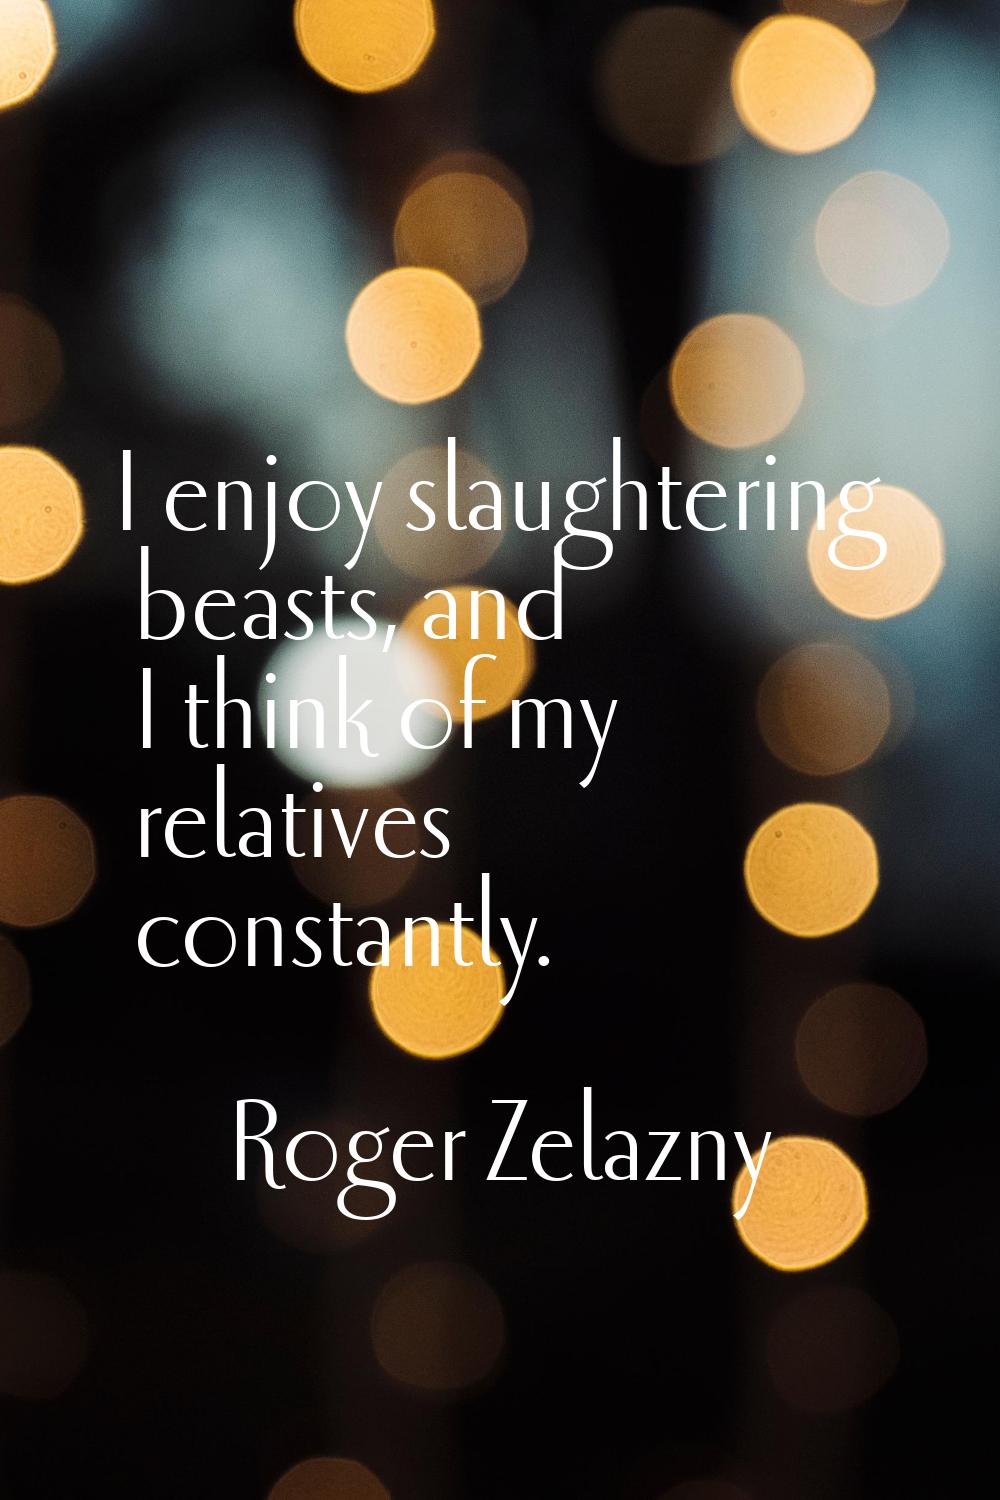 I enjoy slaughtering beasts, and I think of my relatives constantly.